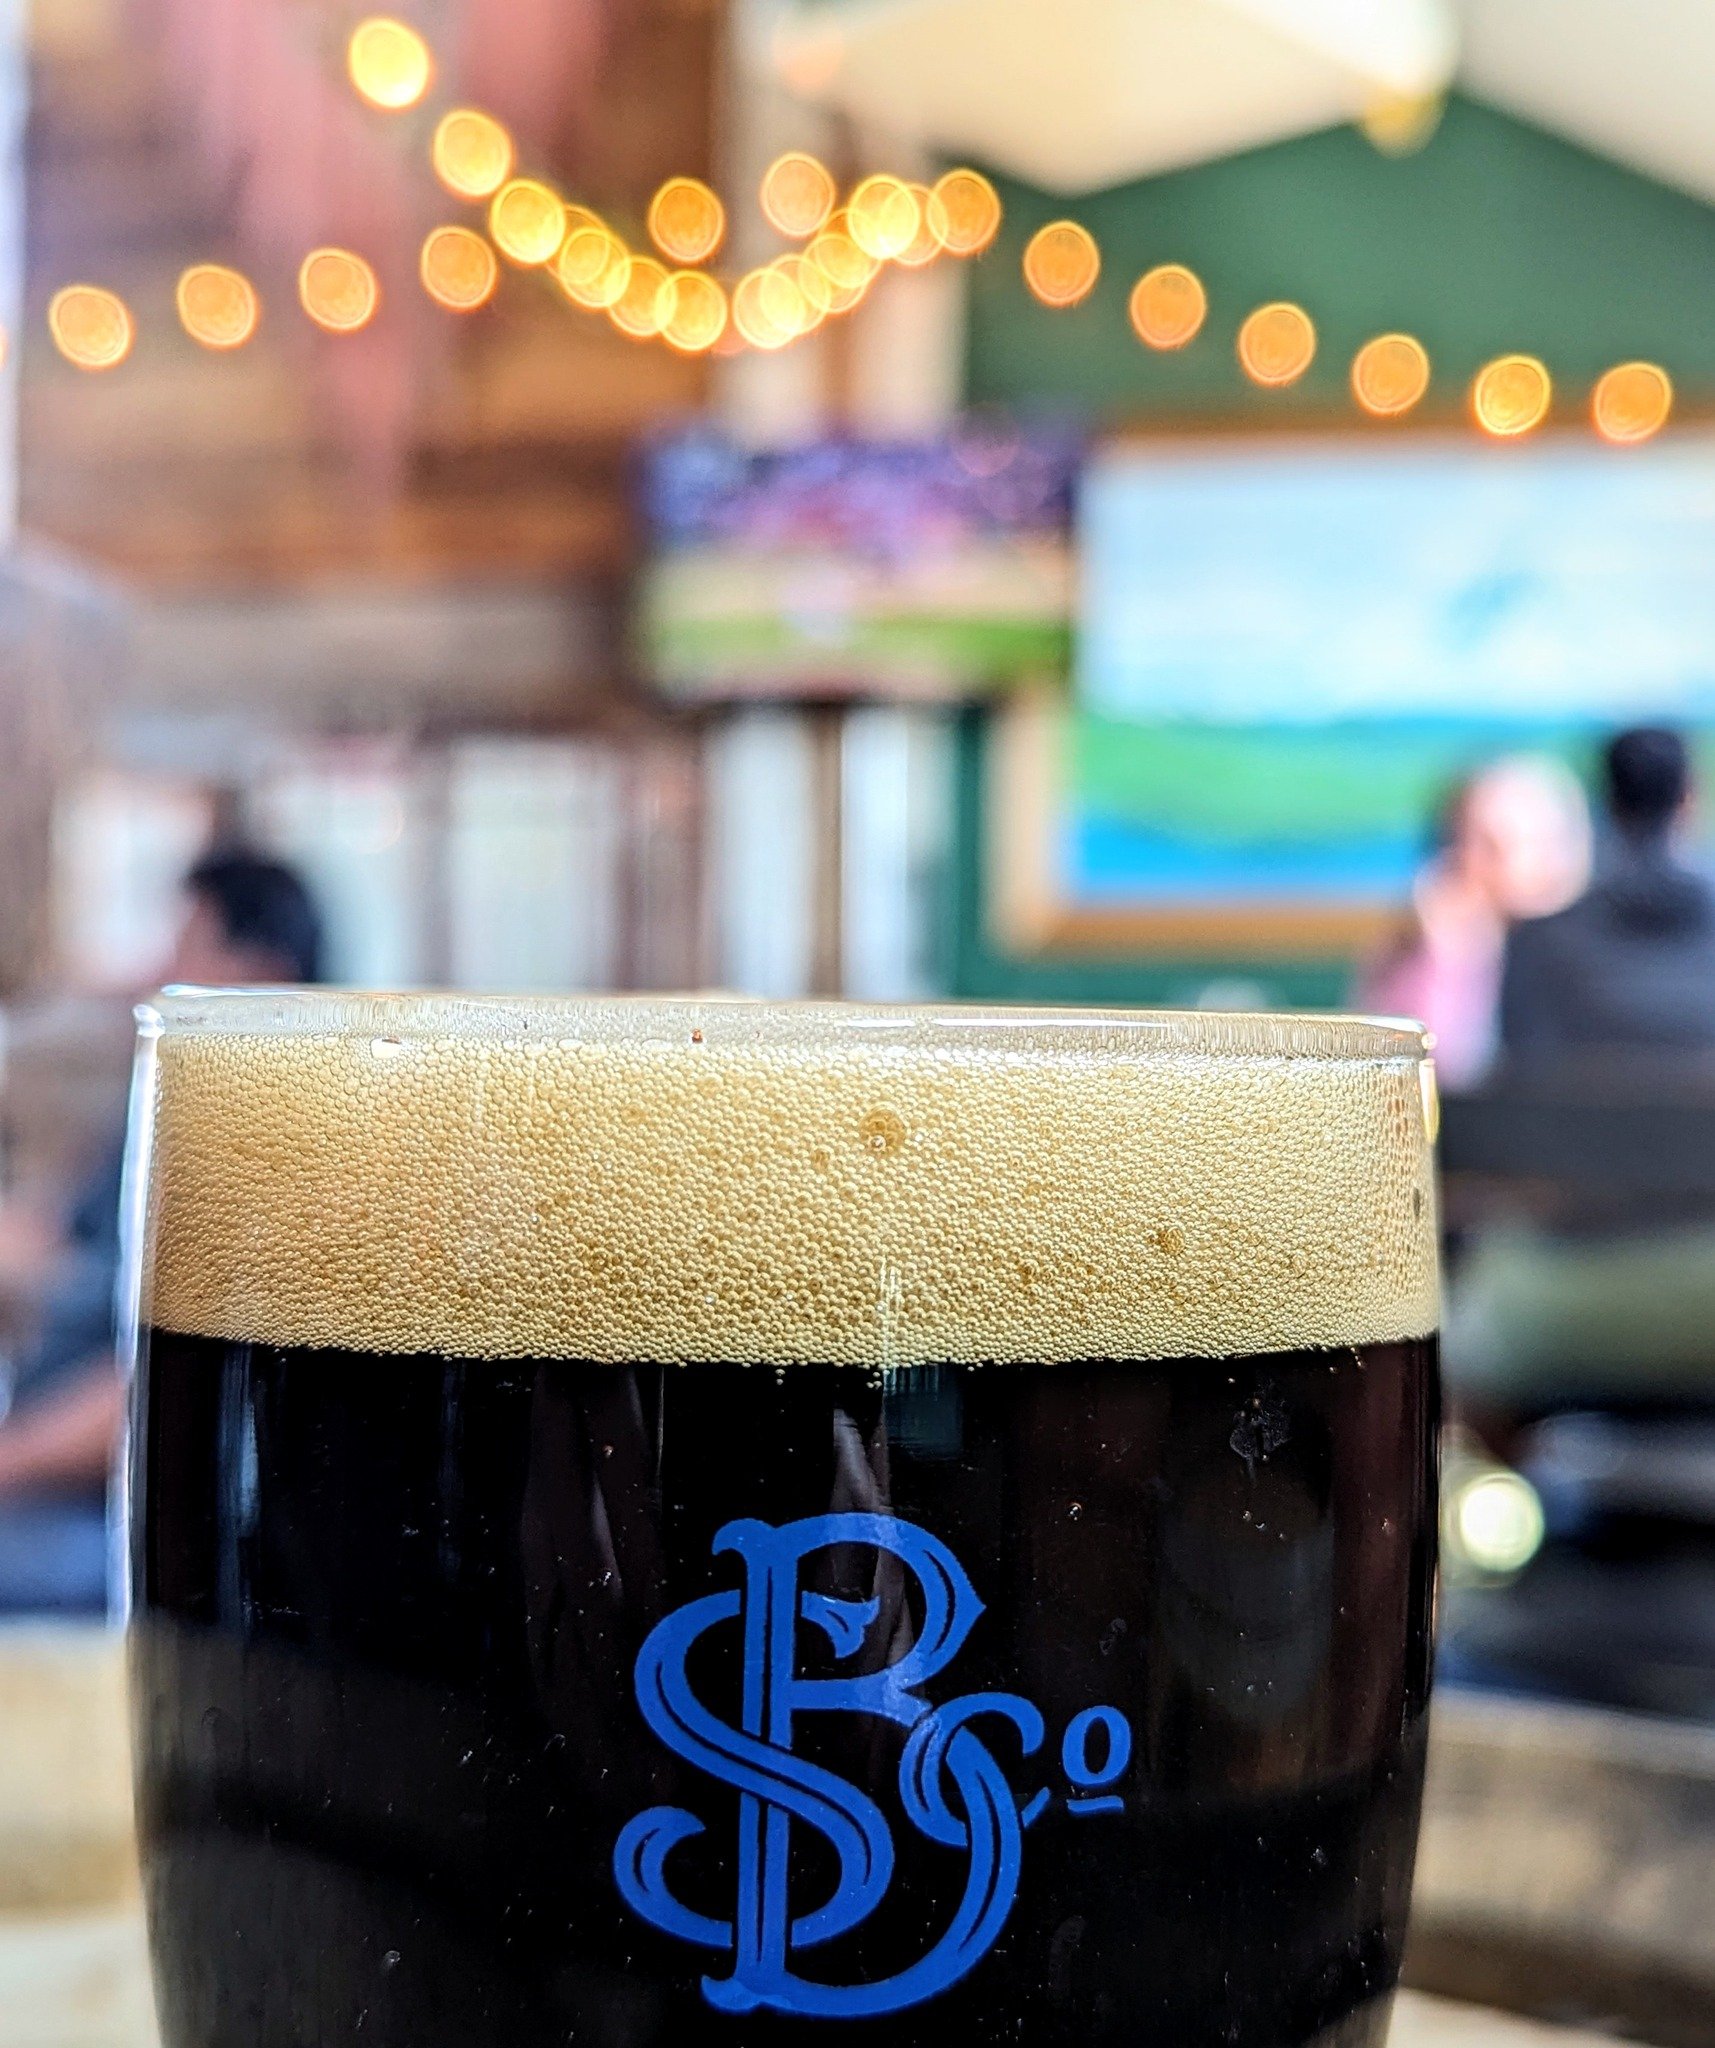 Irish Wristwatch is back on tap! 👀 Draft/growlers only! Come get a pint of our dry Irish stout (4.8%) while it lasts! 🍀🍻